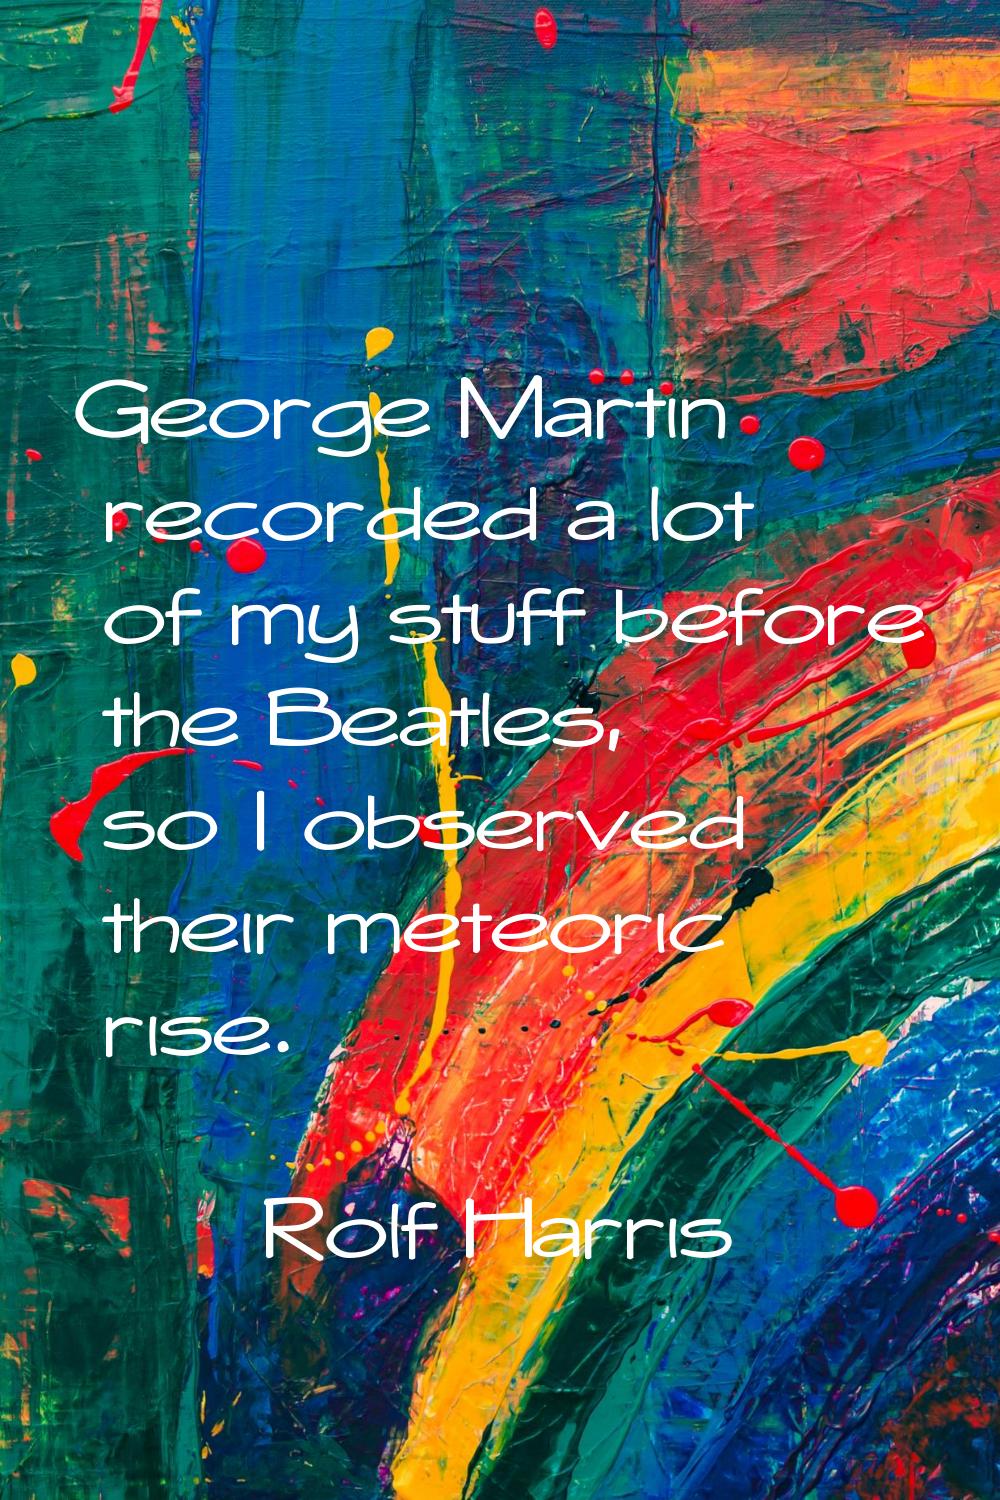 George Martin recorded a lot of my stuff before the Beatles, so I observed their meteoric rise.